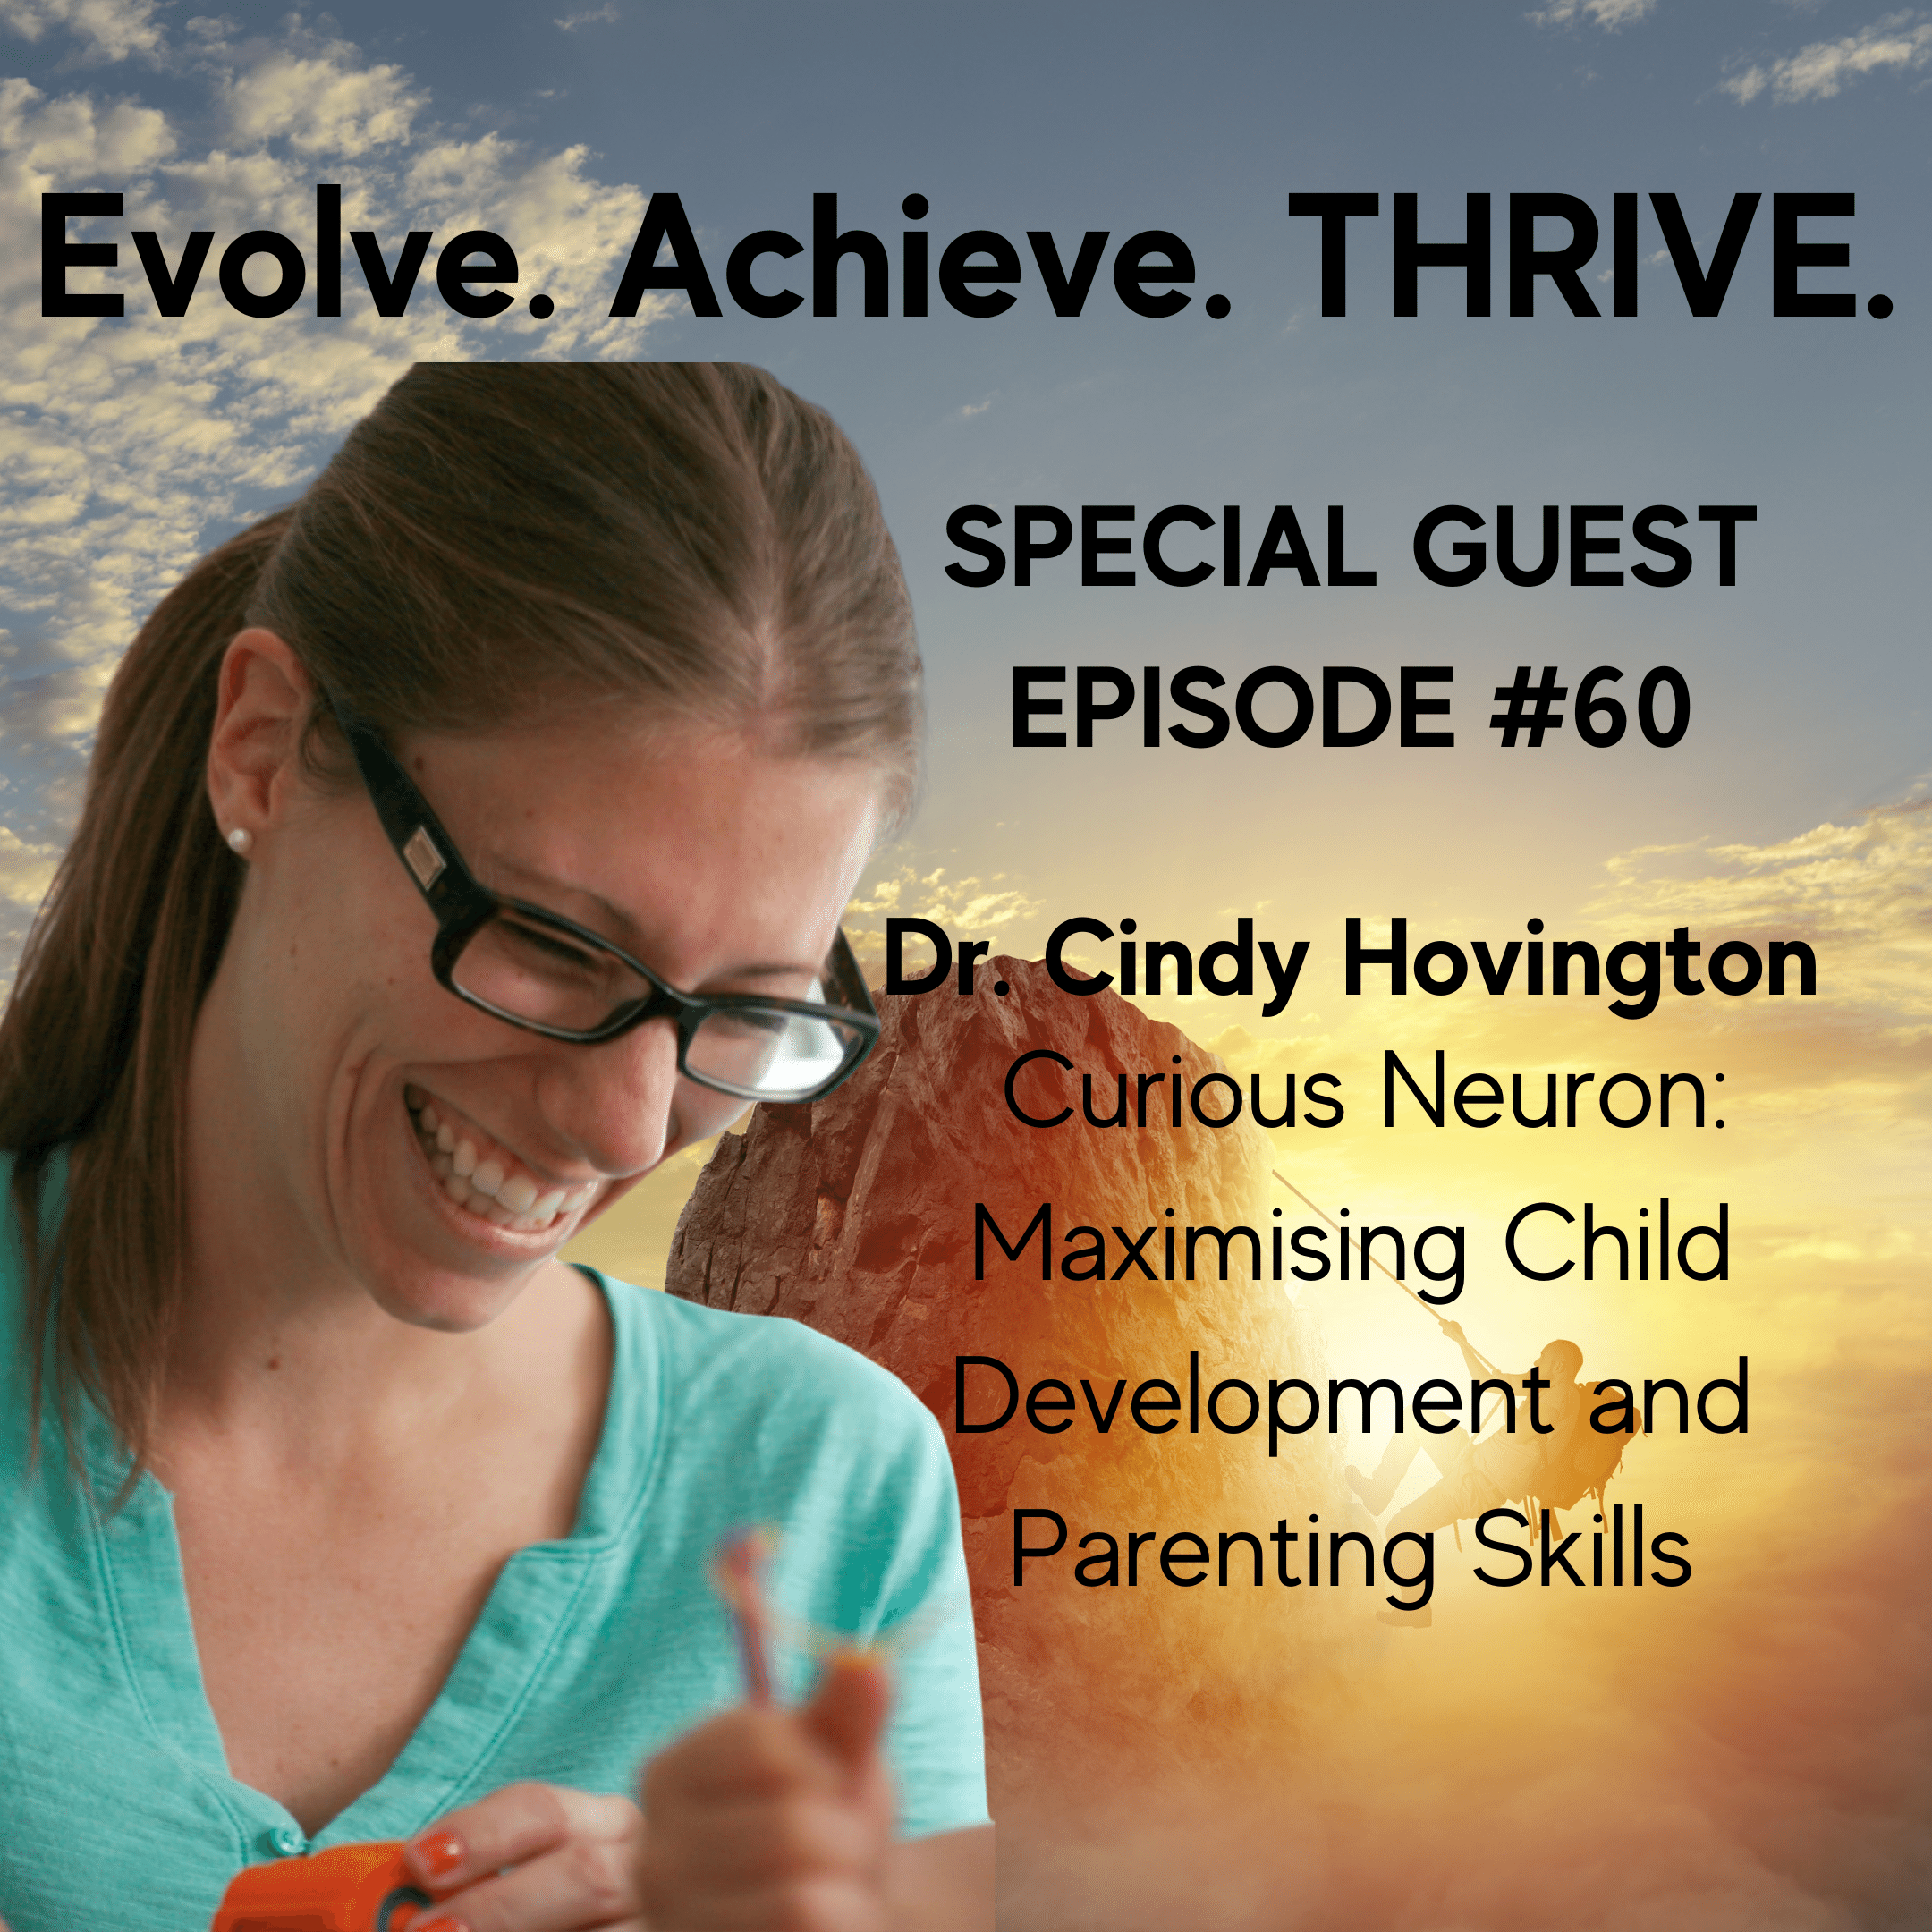 #60 Maximising Child Development and Parenting Skills with Curious Neuron's Dr. Cindy Hovington